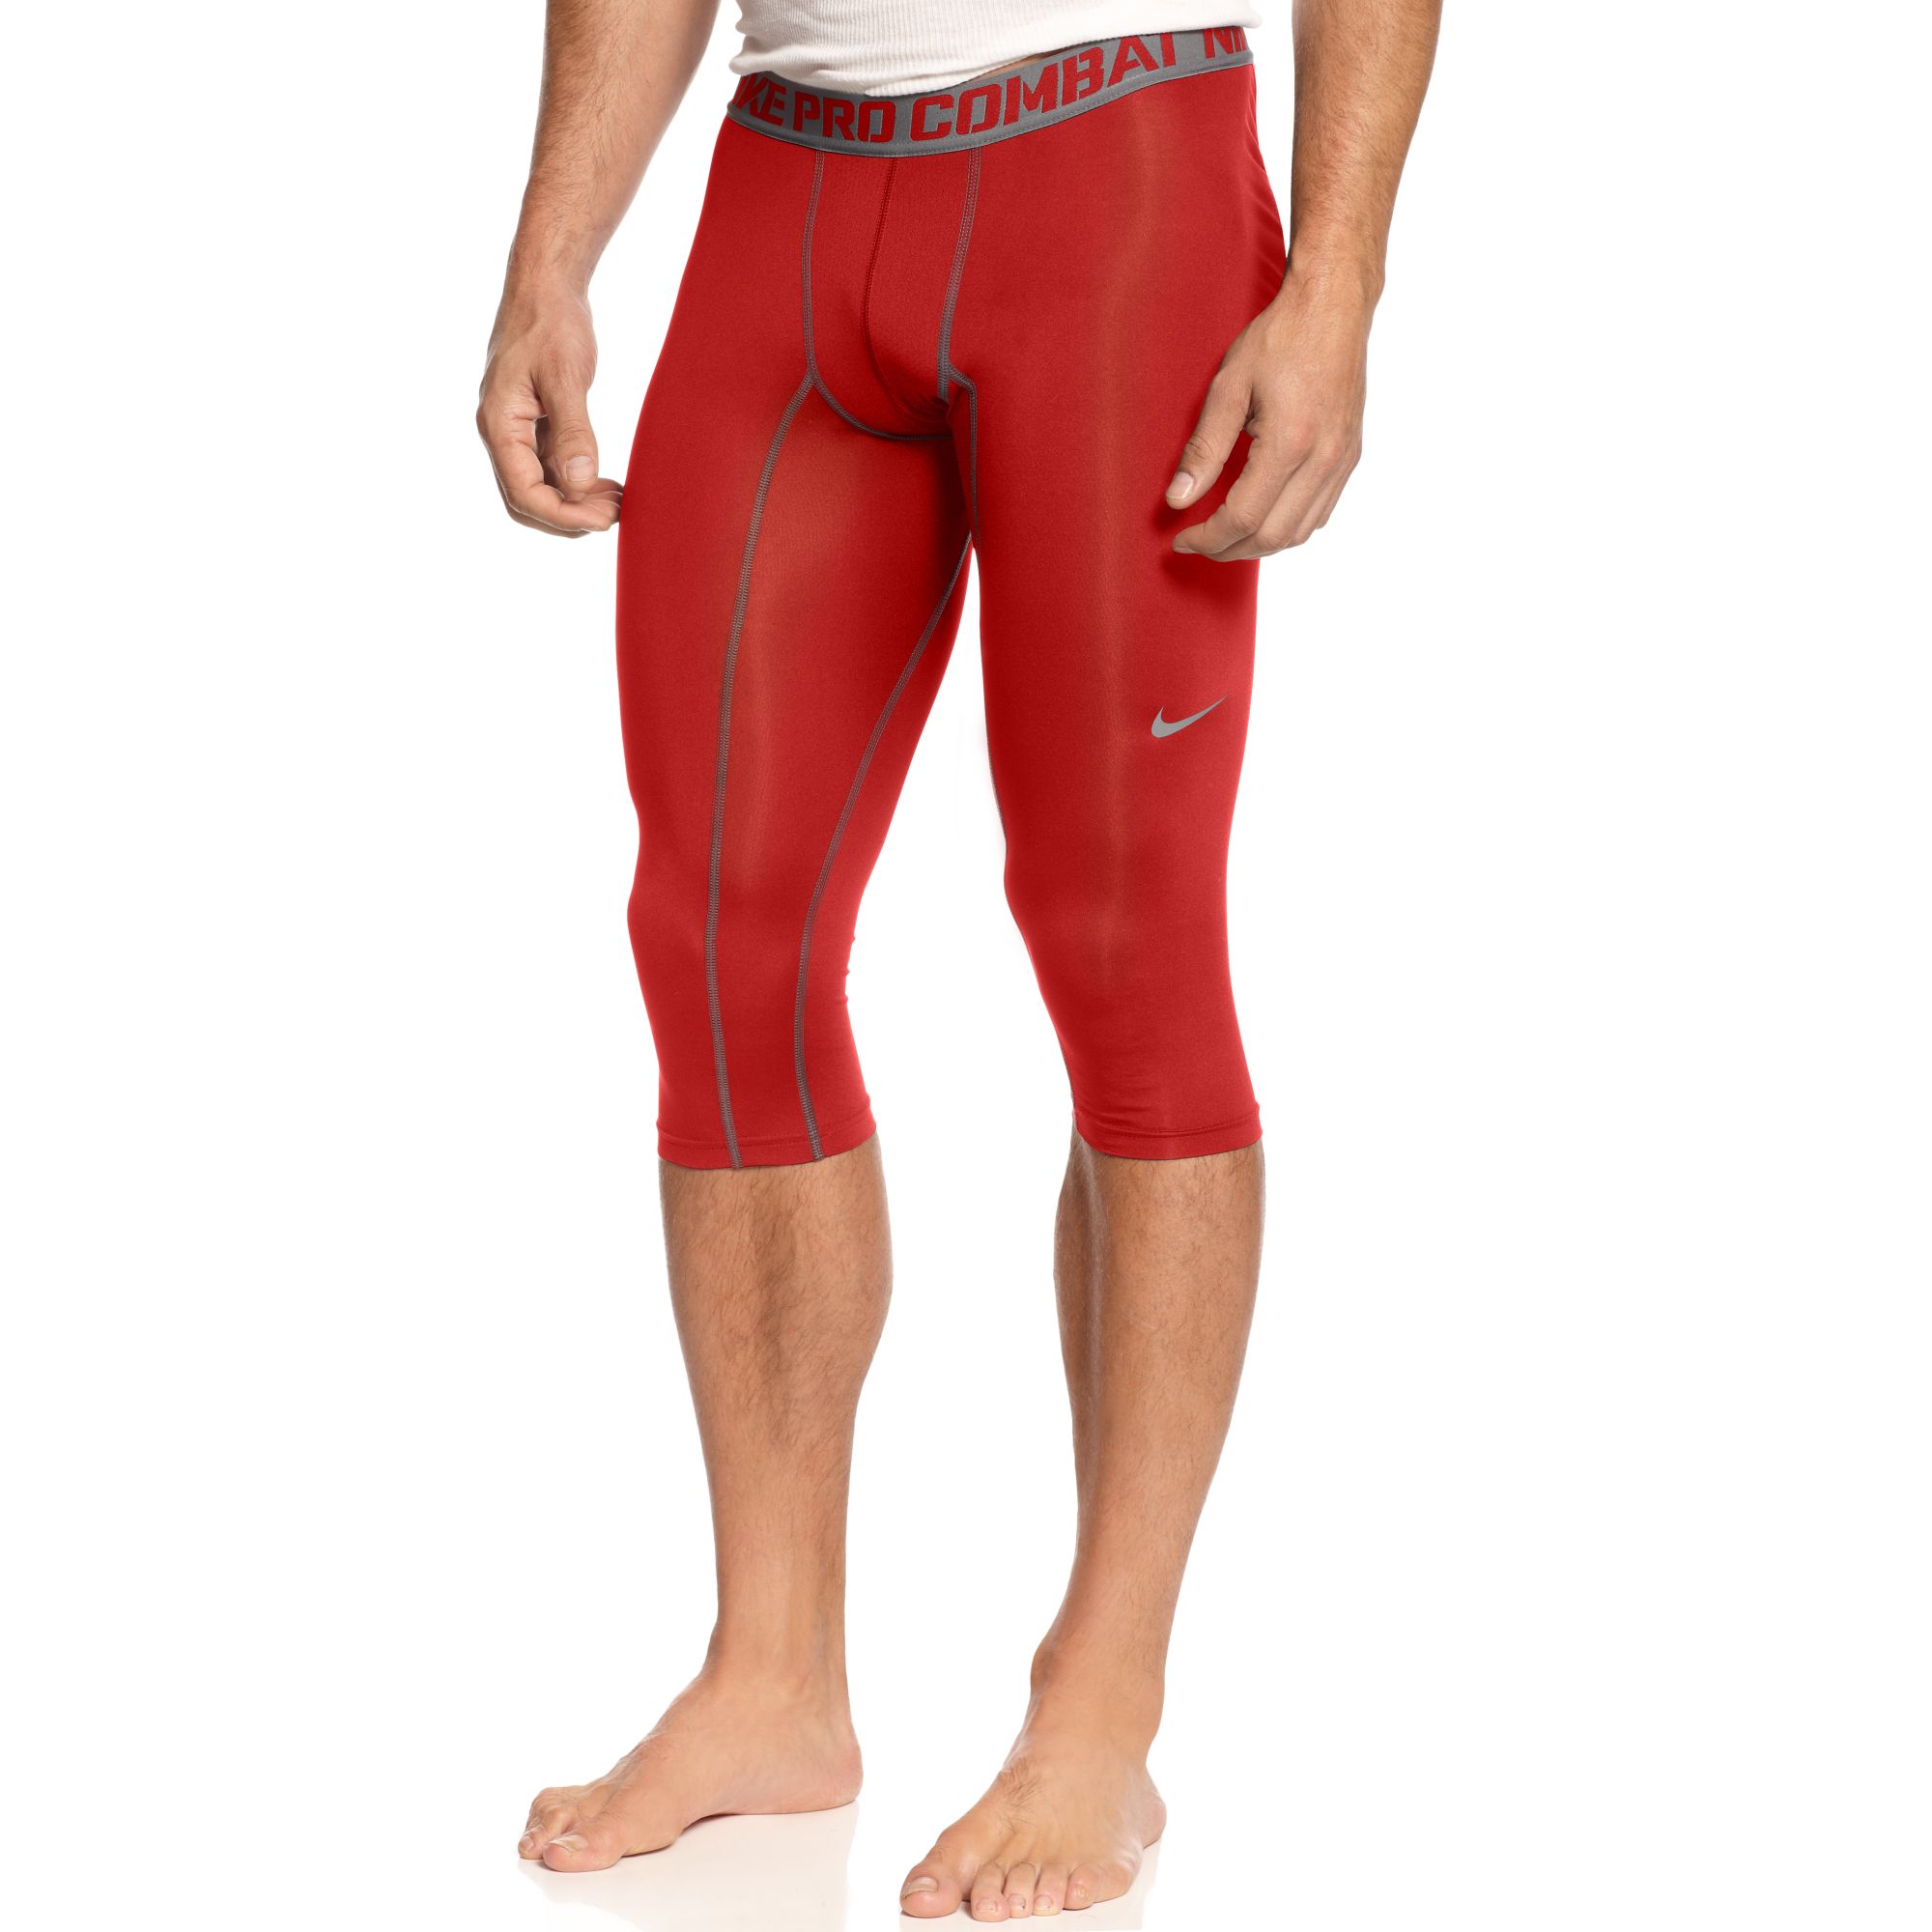 Nike Core Compression Pro Combat Tight in Red for Men - Lyst